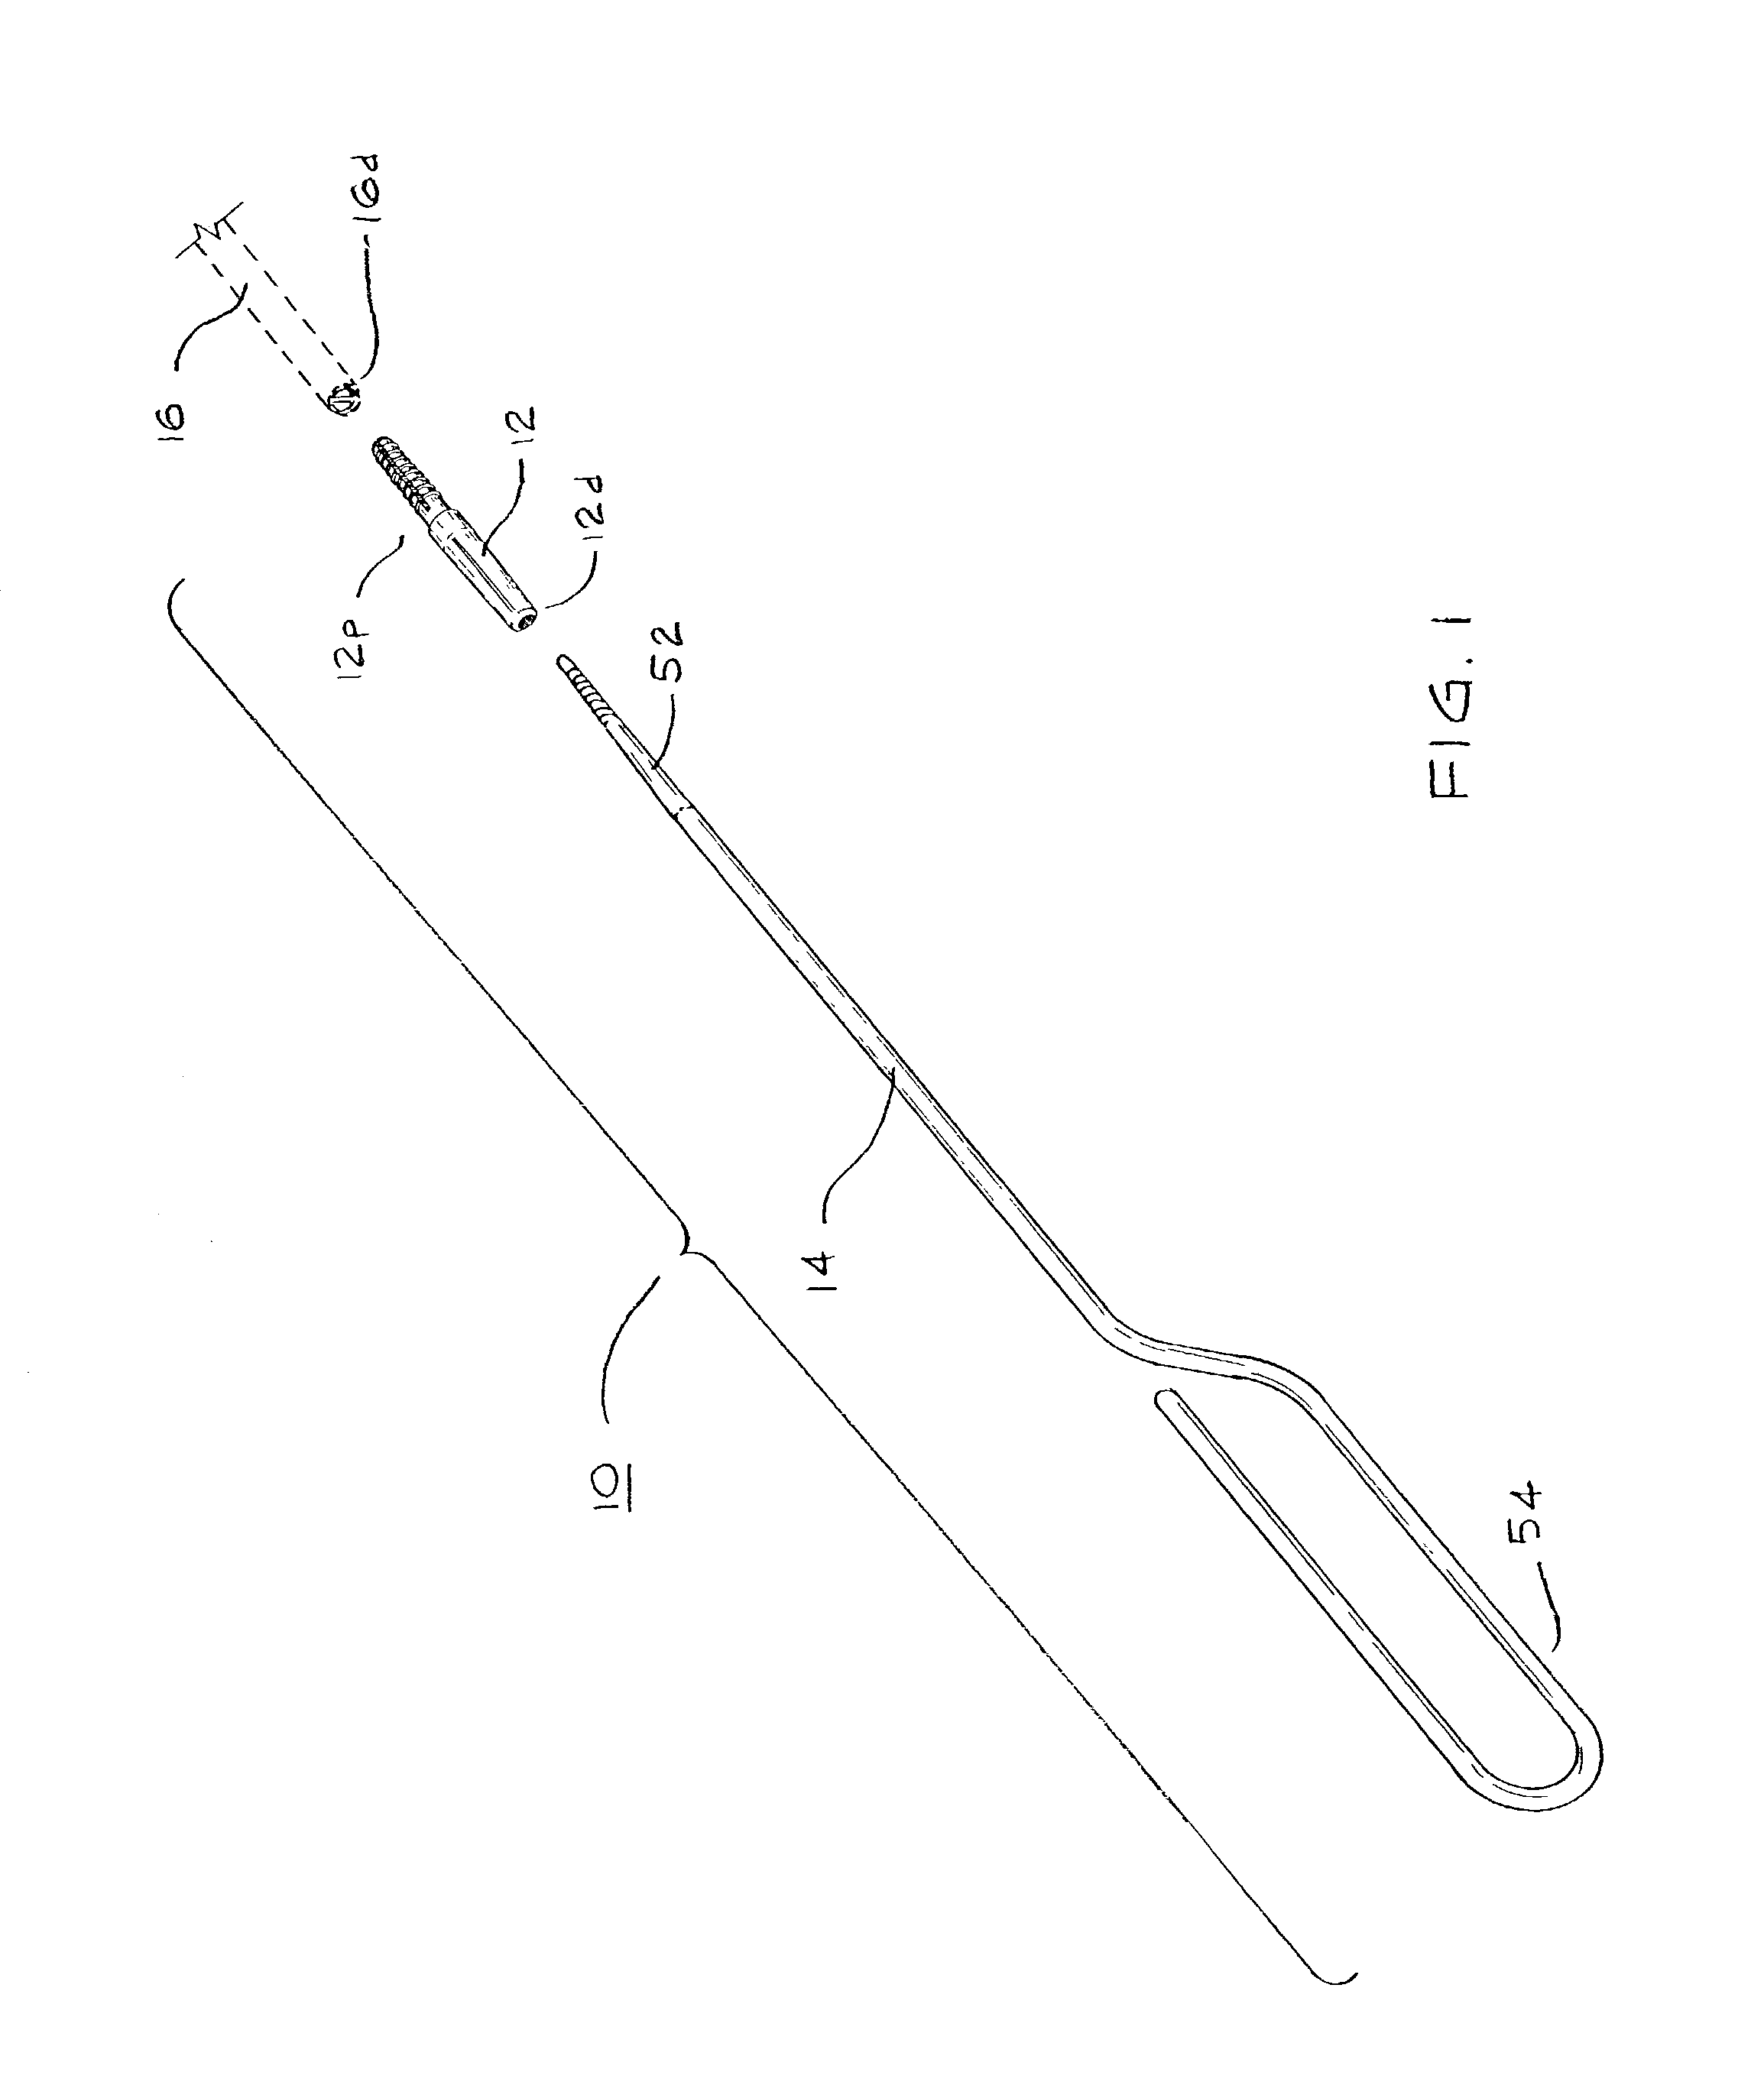 Apparatus and method for reverse tunneling a multi-lumen catheter in a patient